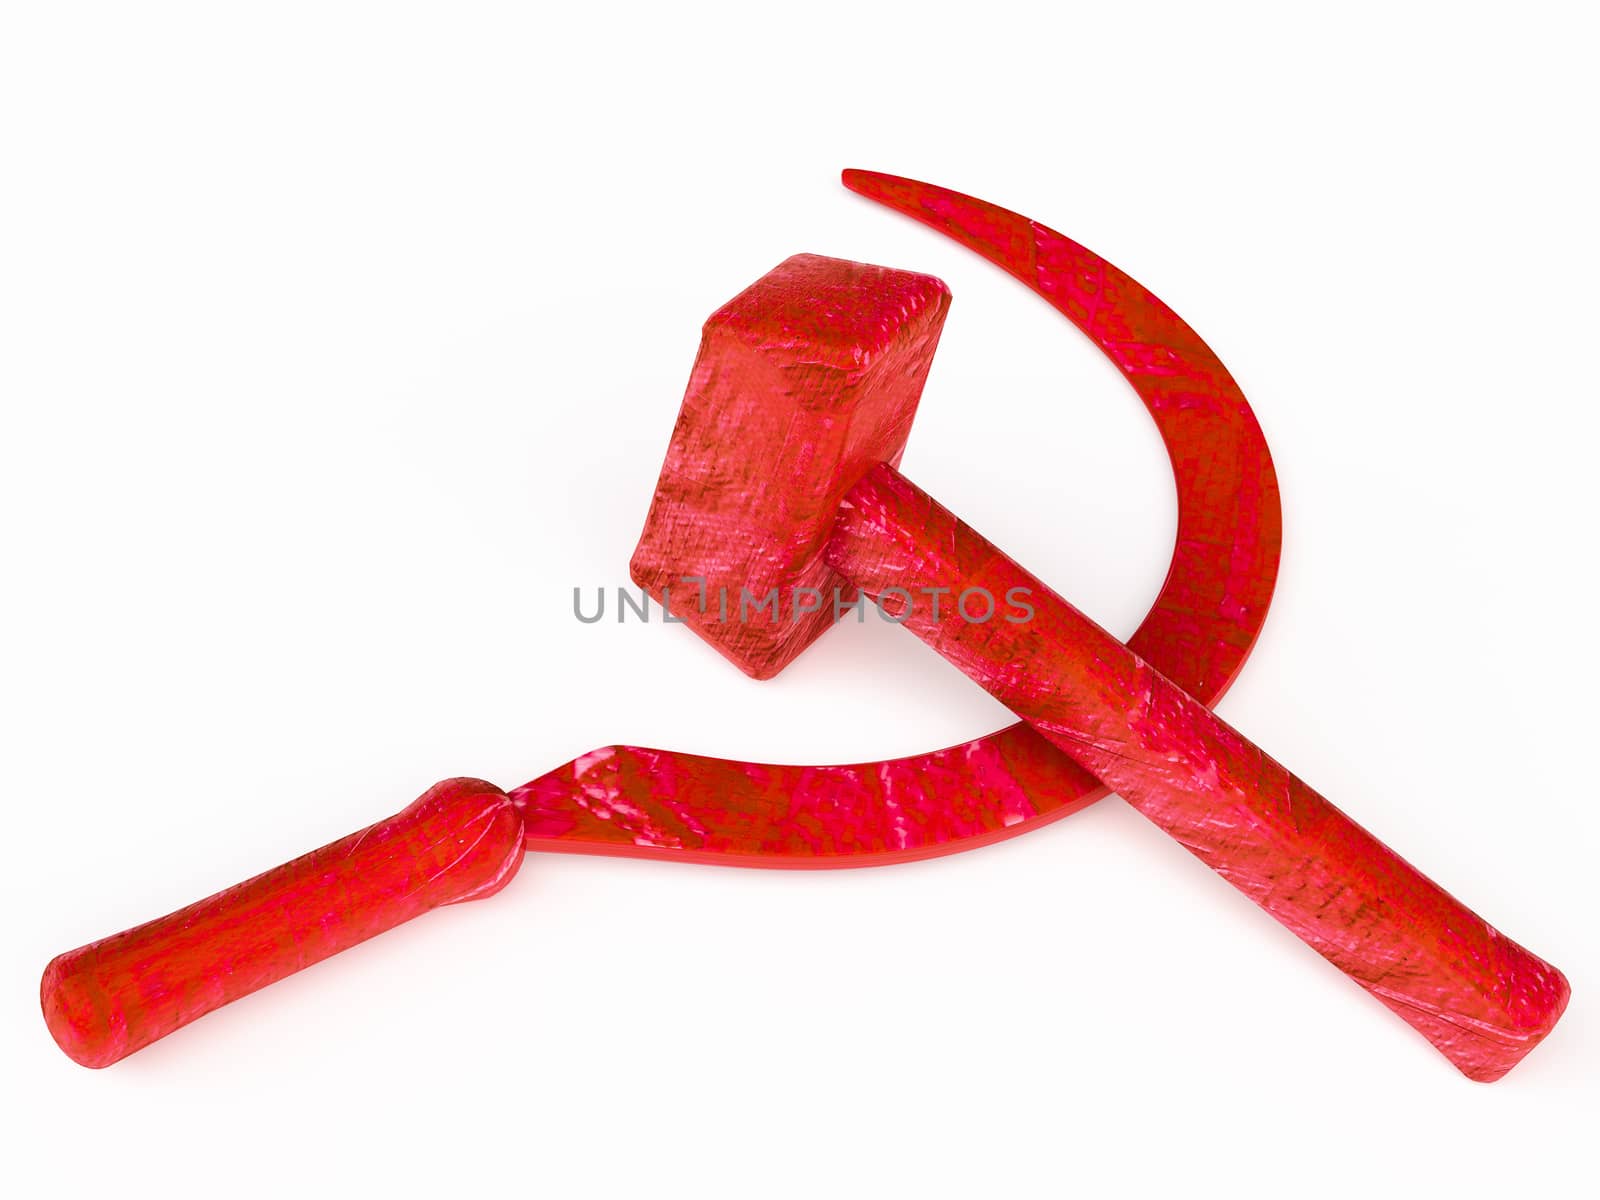 Communist symbol that was conceived during the Russian Revolution by xtate